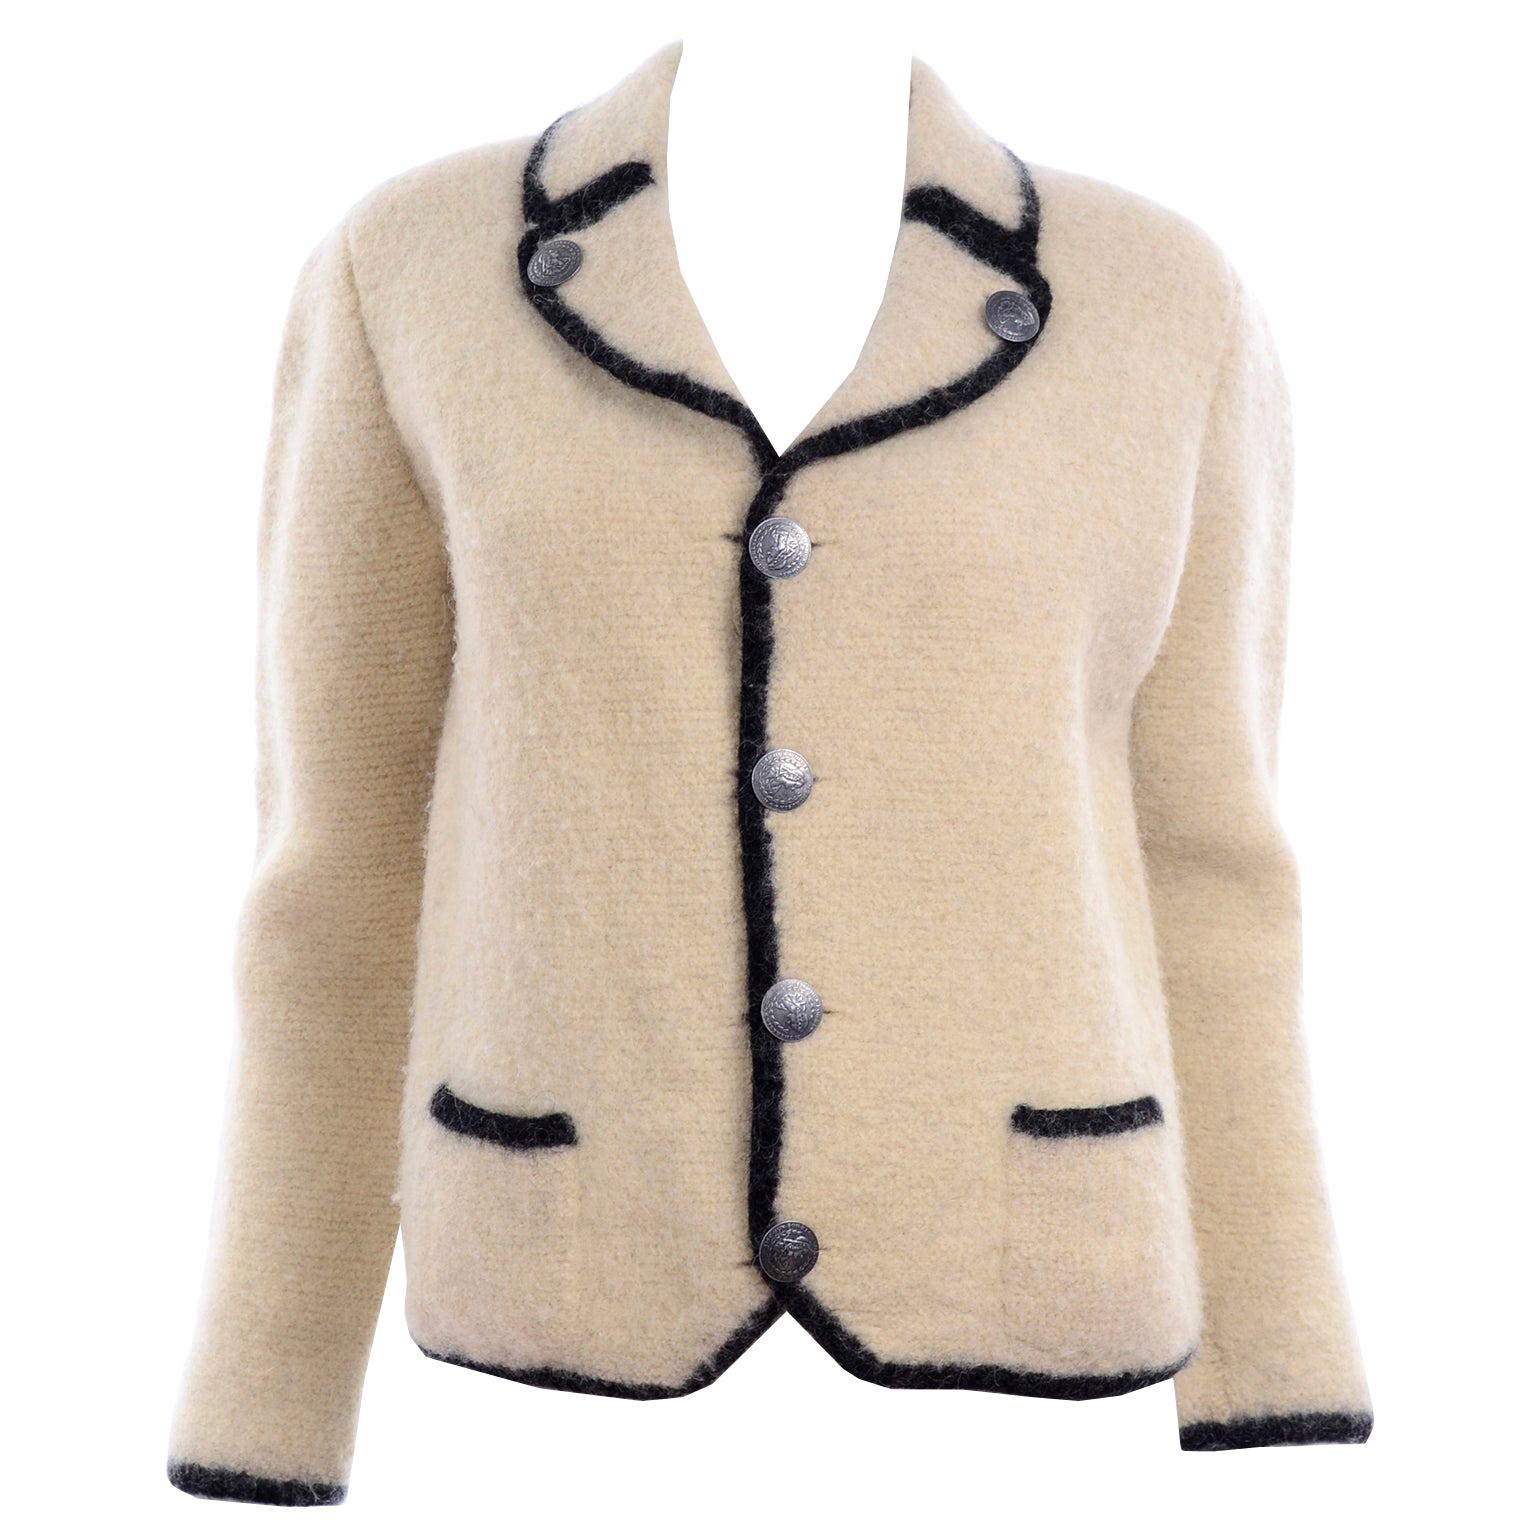 1960s Austrian Vintage Boiled Wool Ivory and Black Jacket With Nickel Buttons For Sale